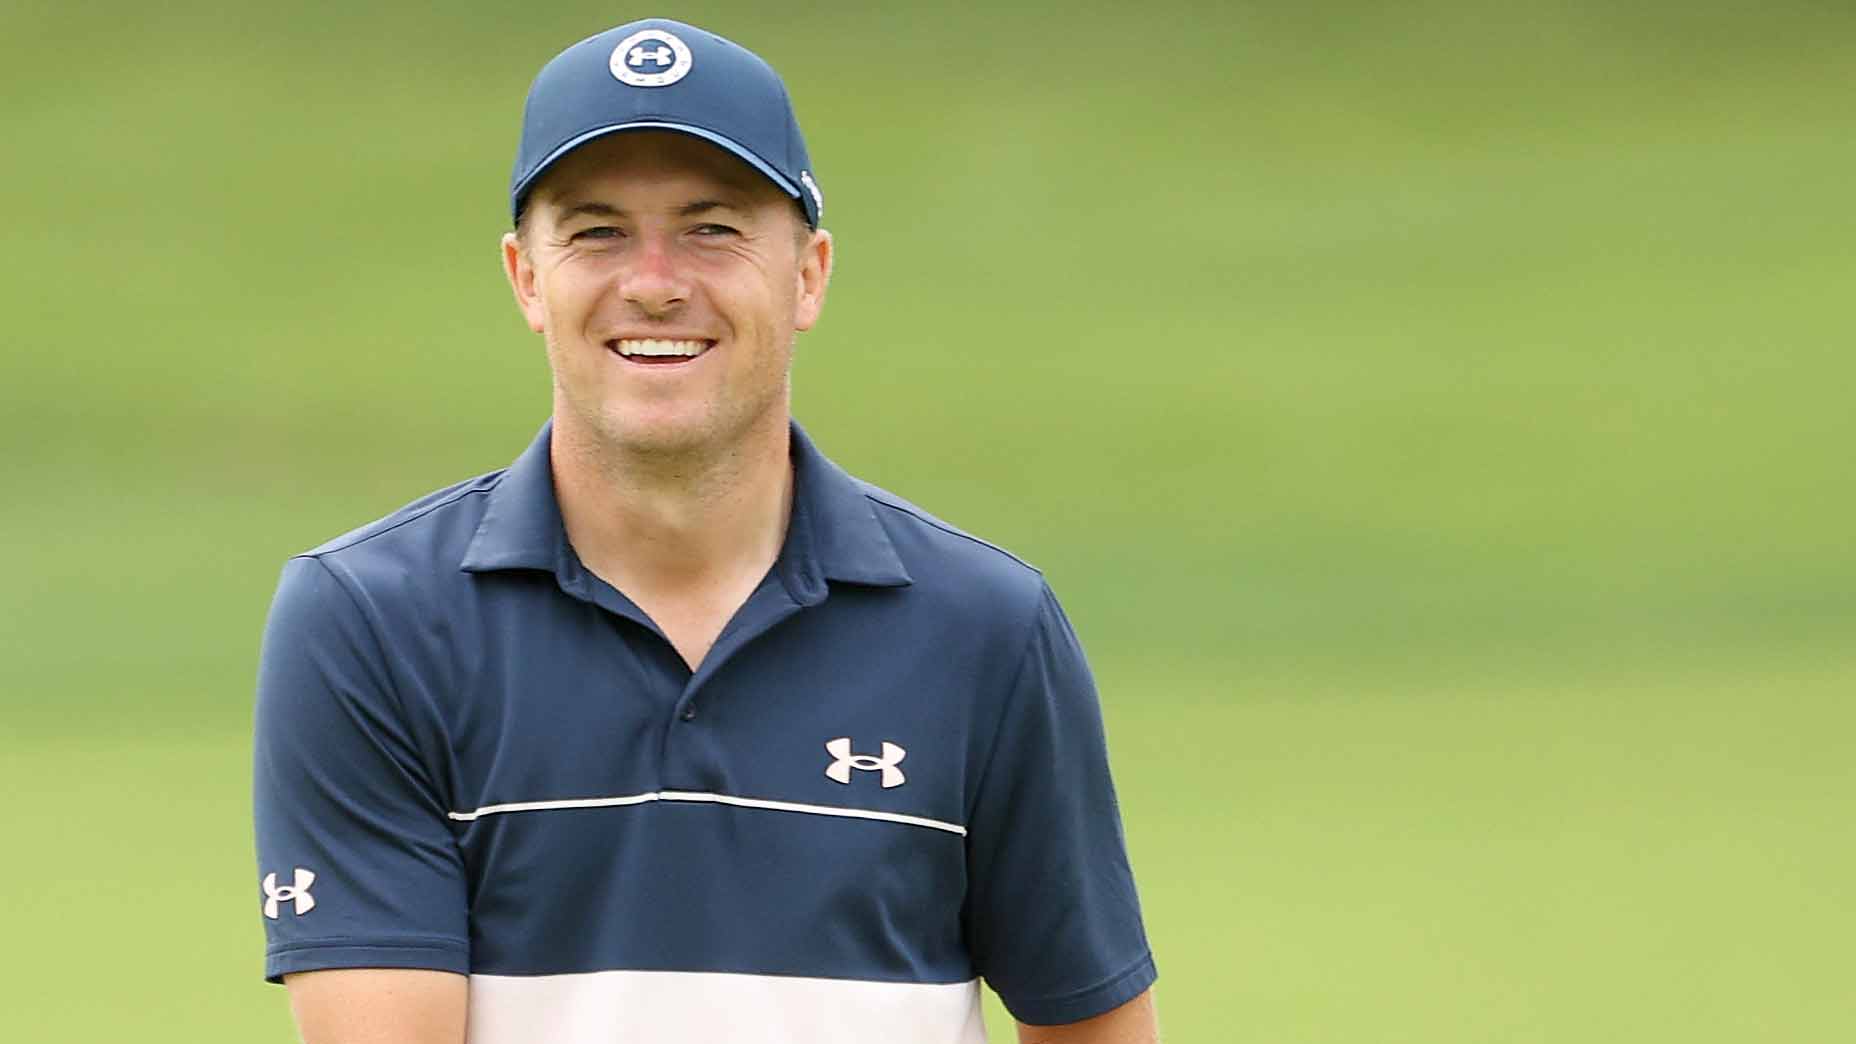 Jordan Spieth is in form heading to this week's PGA Championship. He's not the only one.